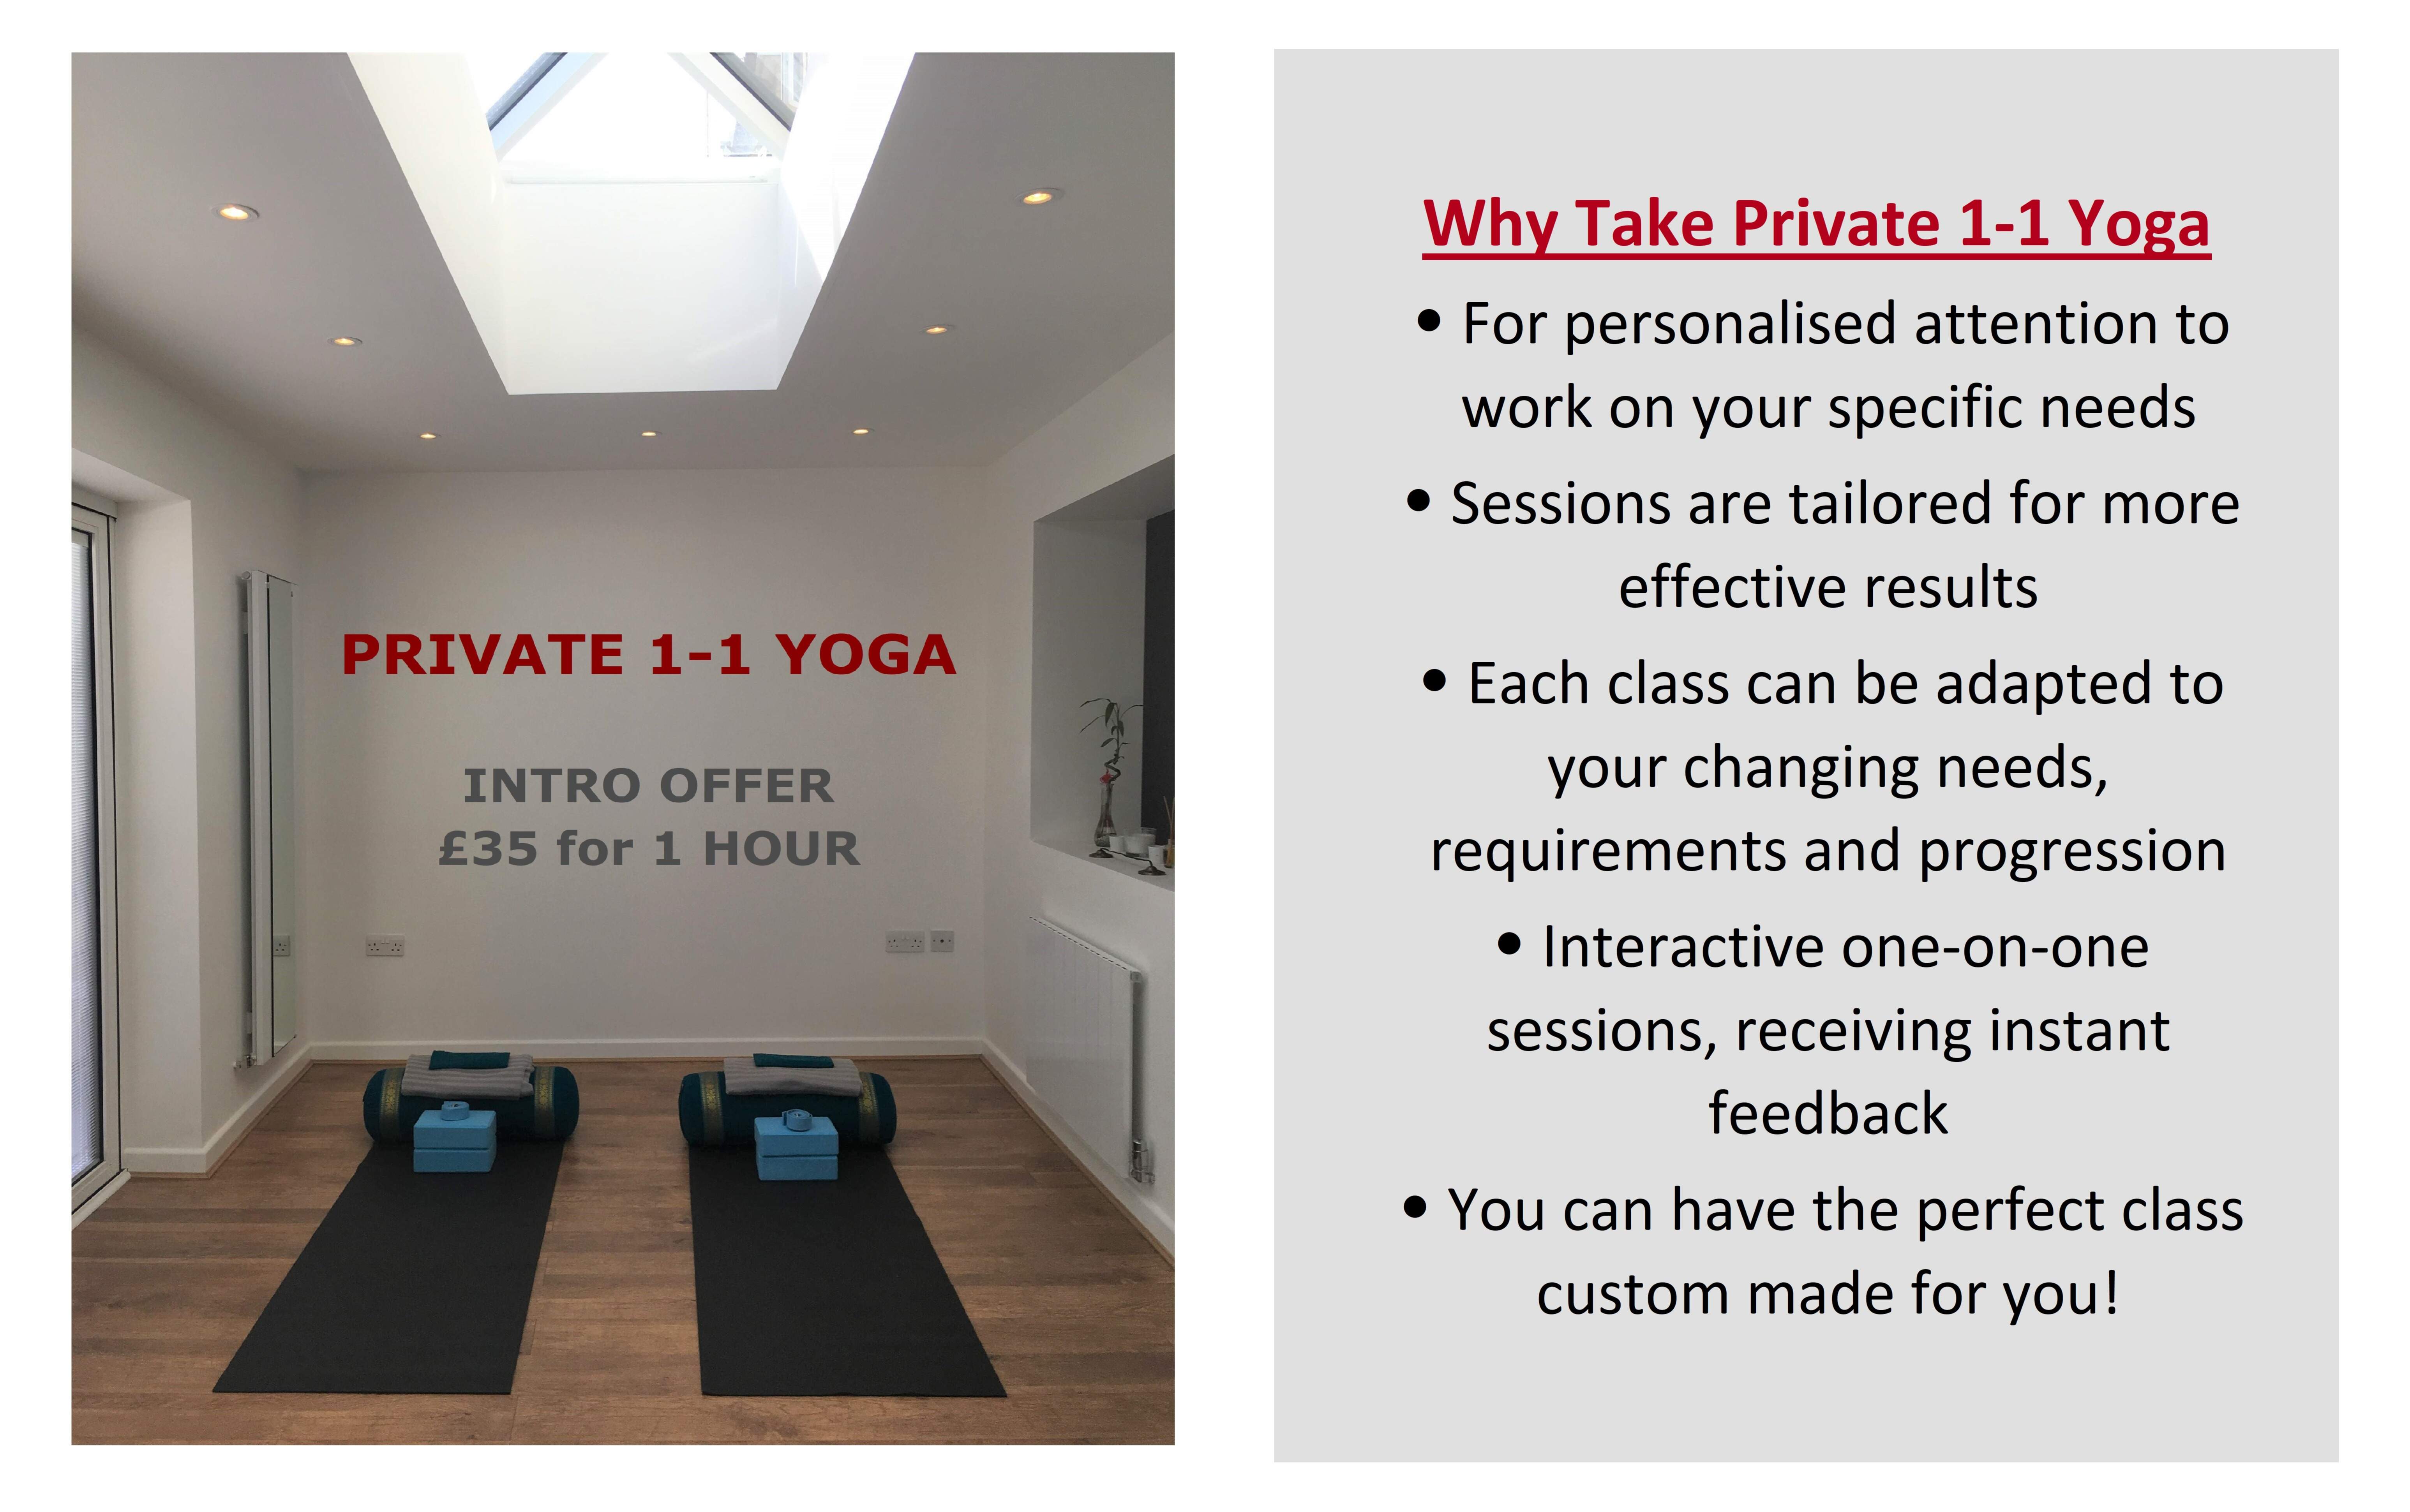 Yoga Mind Balance Private 1-1 Yoga classes, tailored to your needs and requirements, Intro offer available for first session